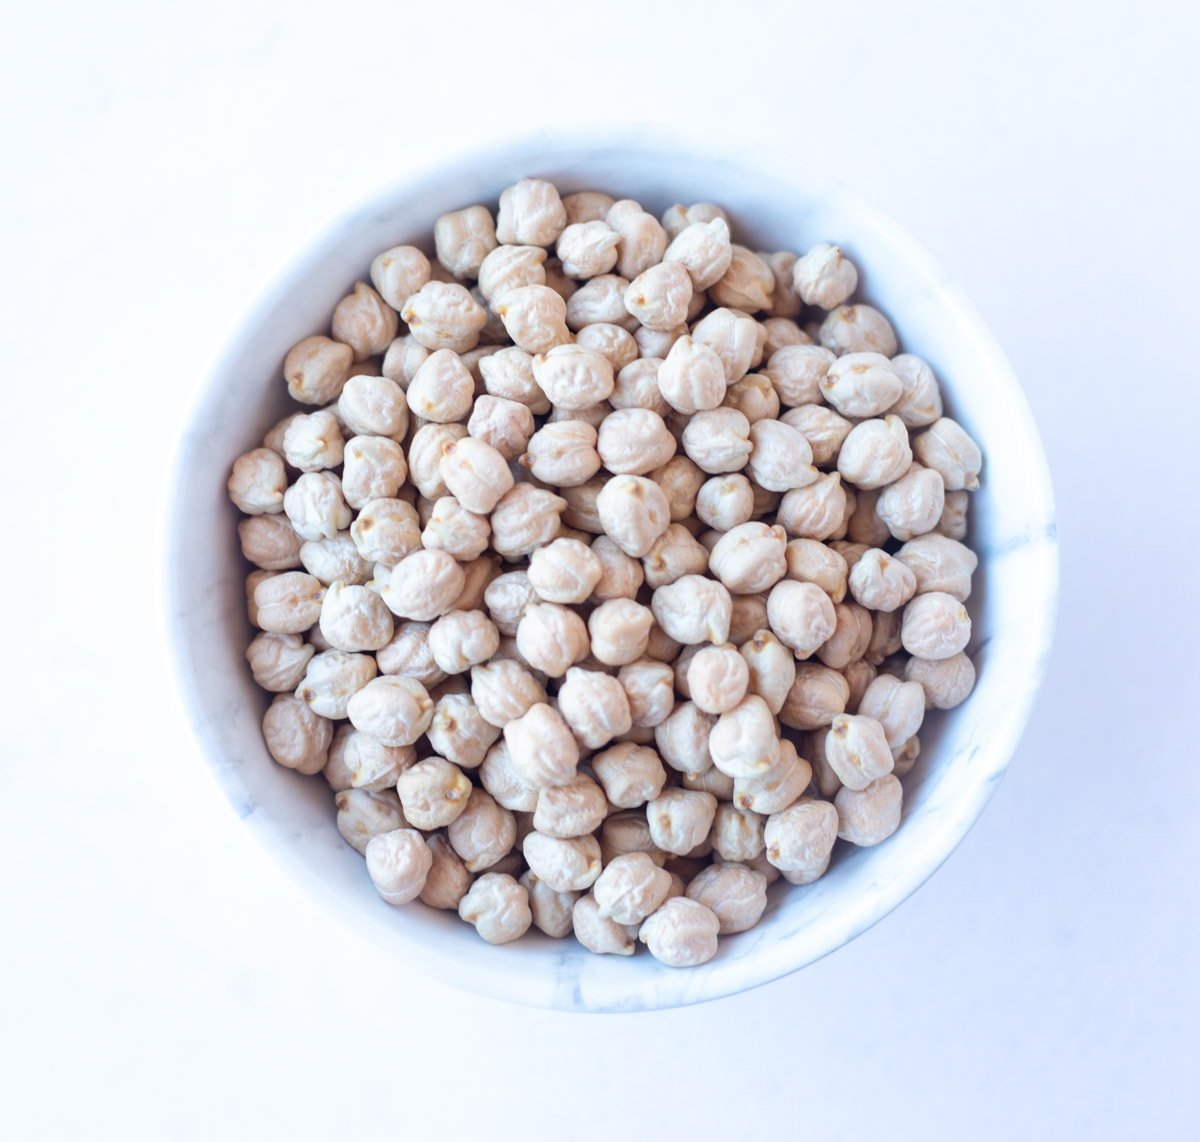 Garbanzo Beans, also called chickpeas or  Kabuli Chana or Chhole in a white bowl